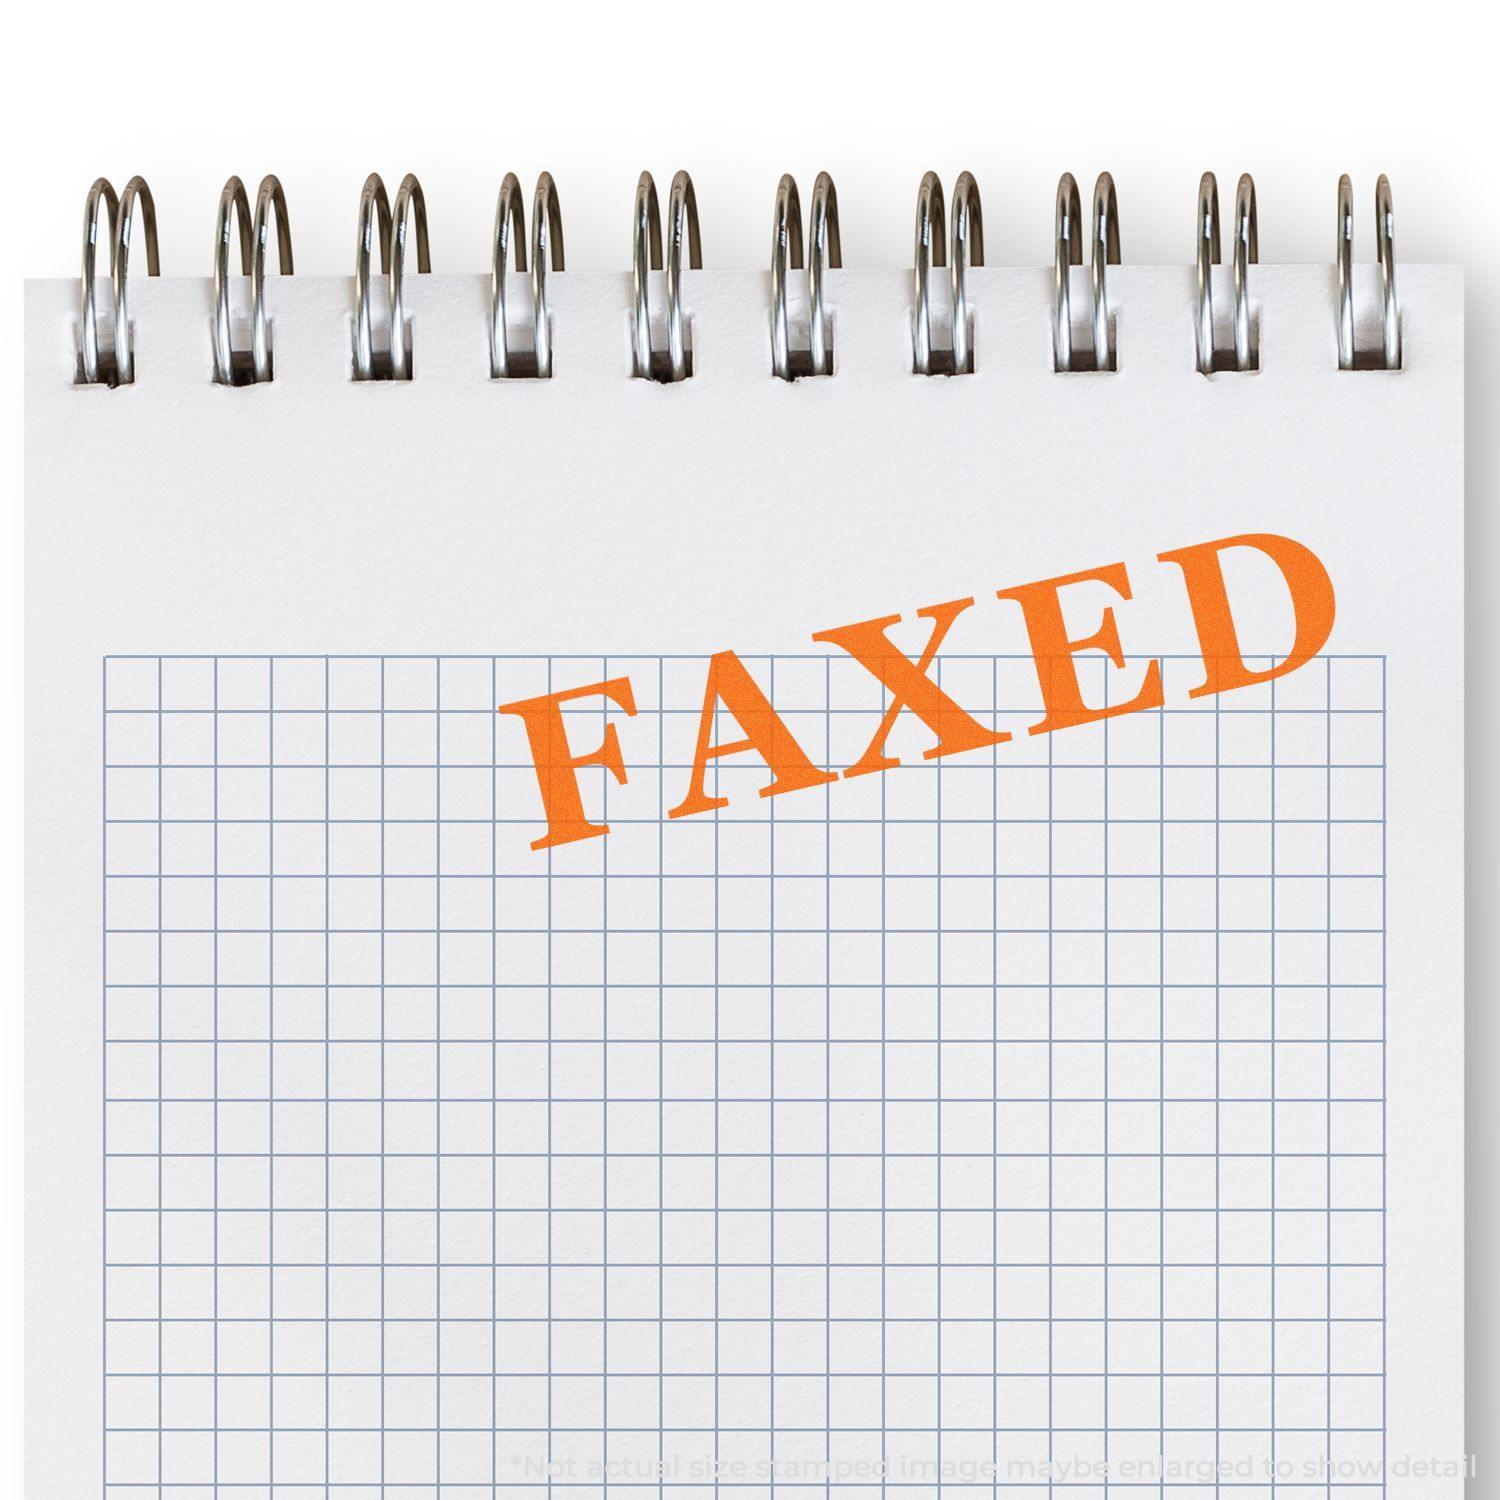 A stock office rubber stamp with a stamped image showing how the text "FAXED" in a large times font is displayed after stamping.